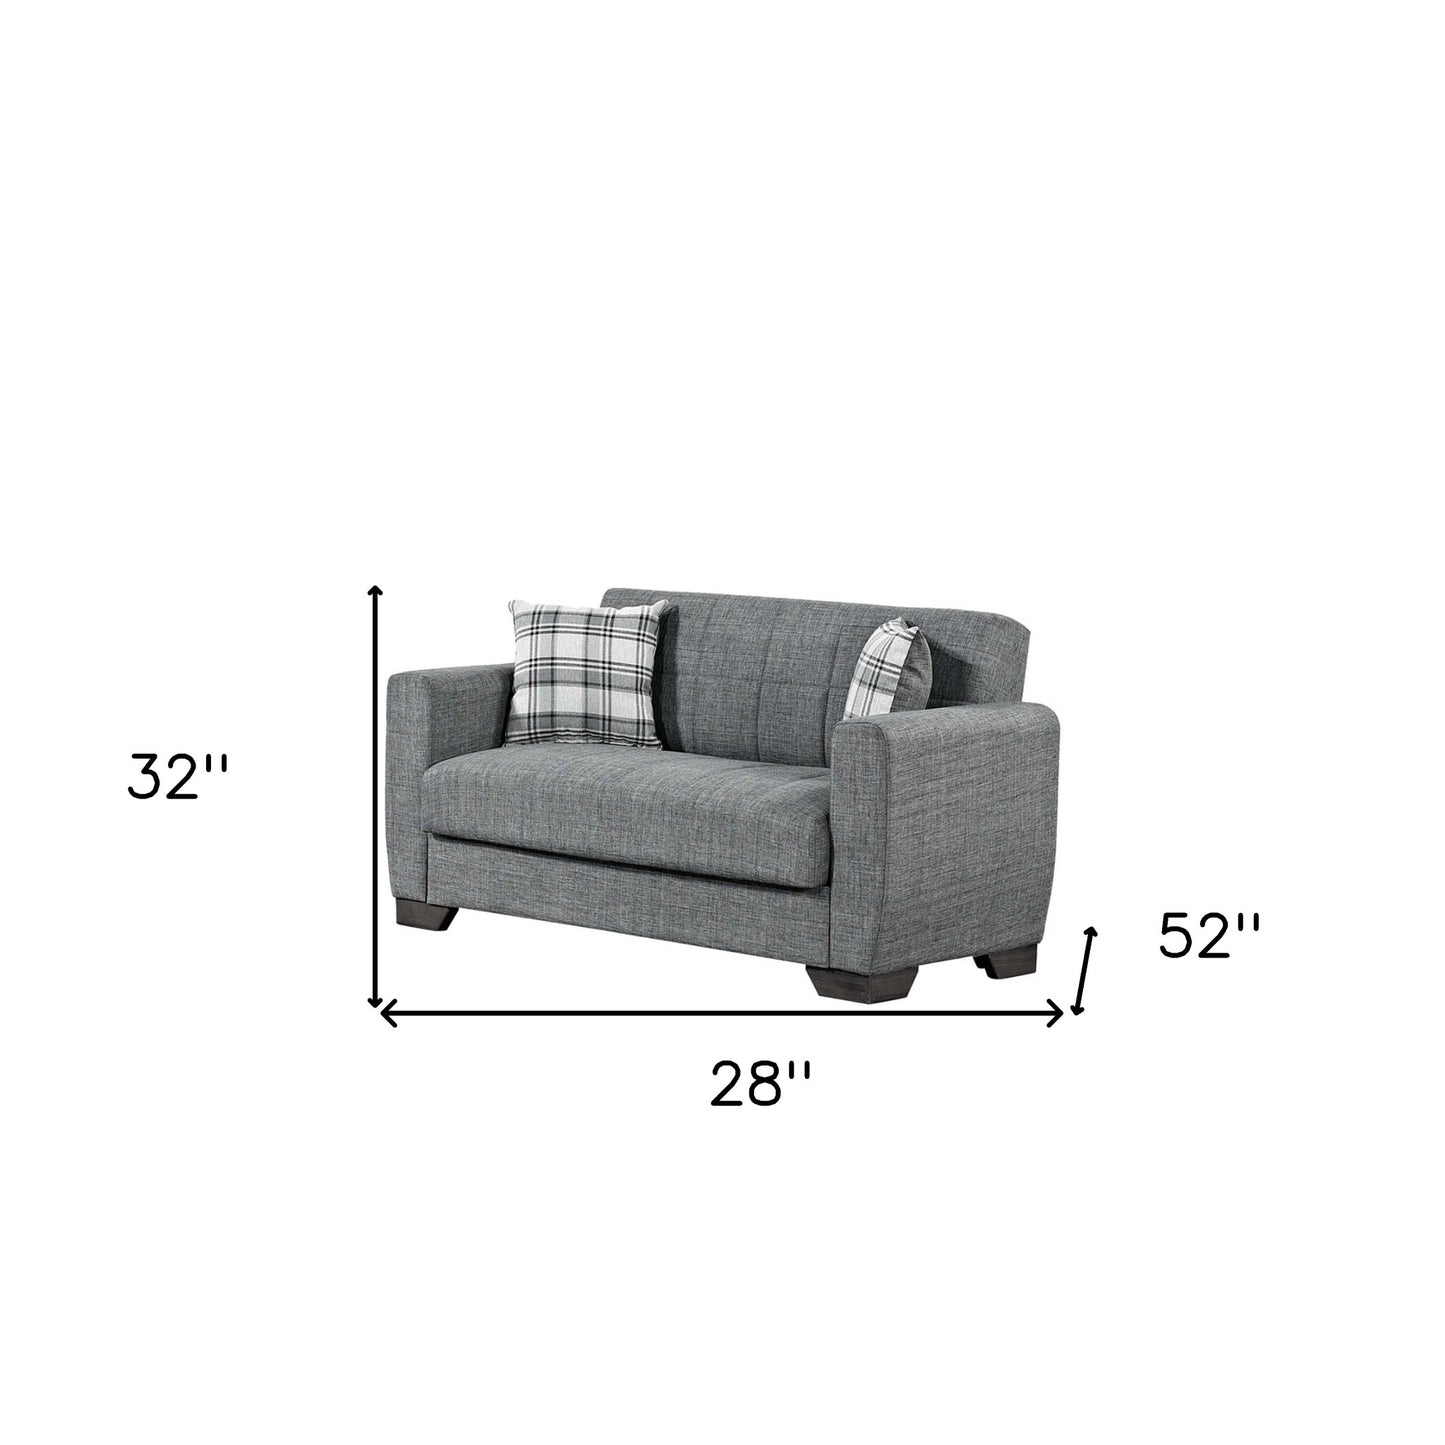 52" Gray Brown Chenille Futon Convertible Sleeper Love Seat With Storage And Toss Pillows